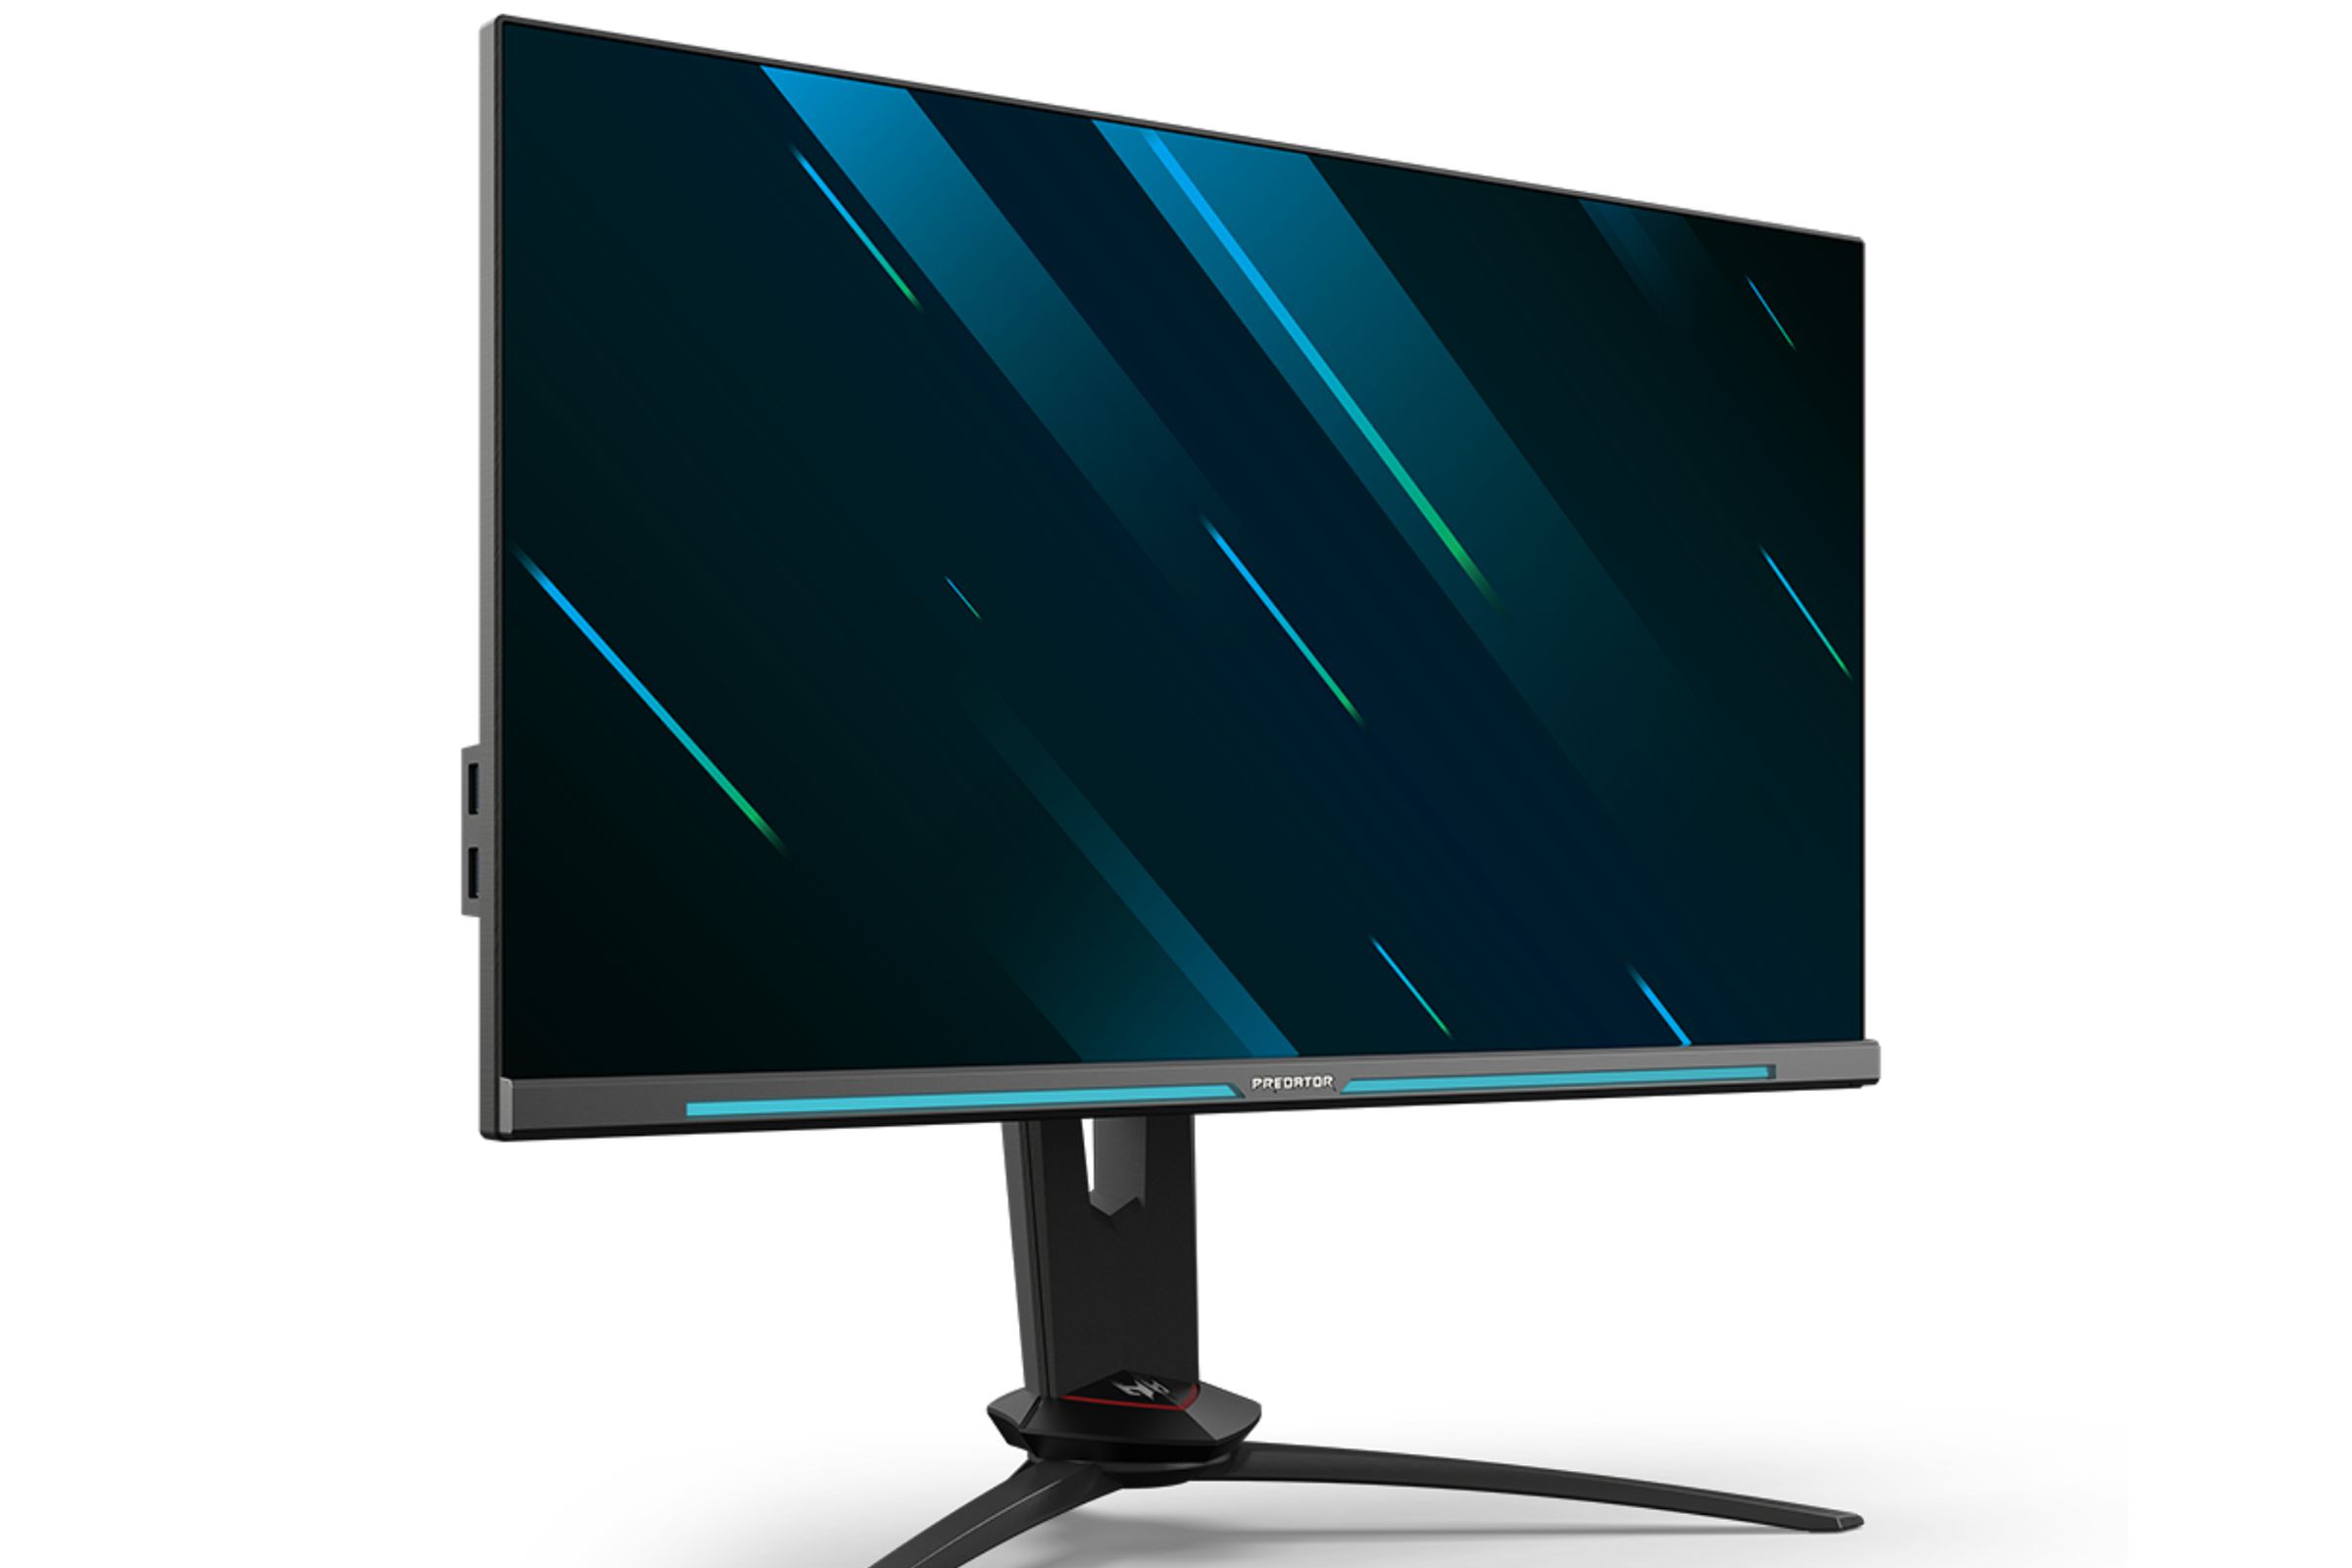 Acer’s XB253Q GW gaming monitor has a strip of RGB lights that flash according to what’s on the screen.